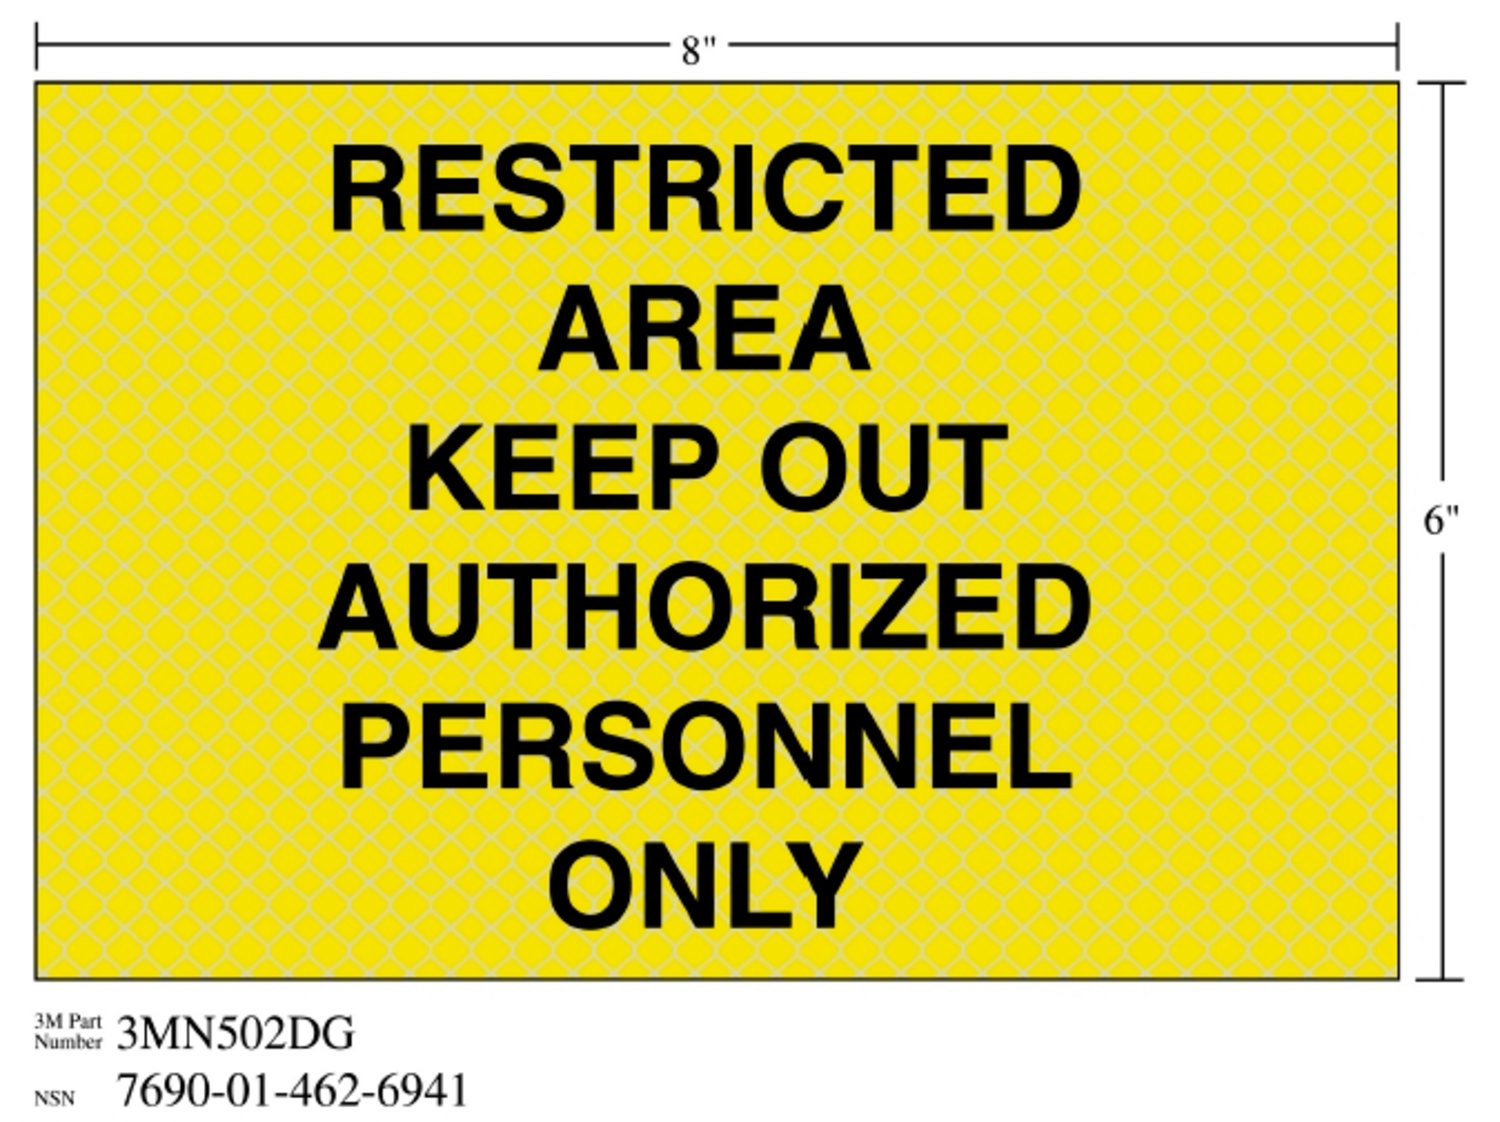 7010343559 - 3M Diamond Grade Weapon Sign 3MN502DG, "RESTRICT…ONLY", 8 in x 6 in,
10/Package